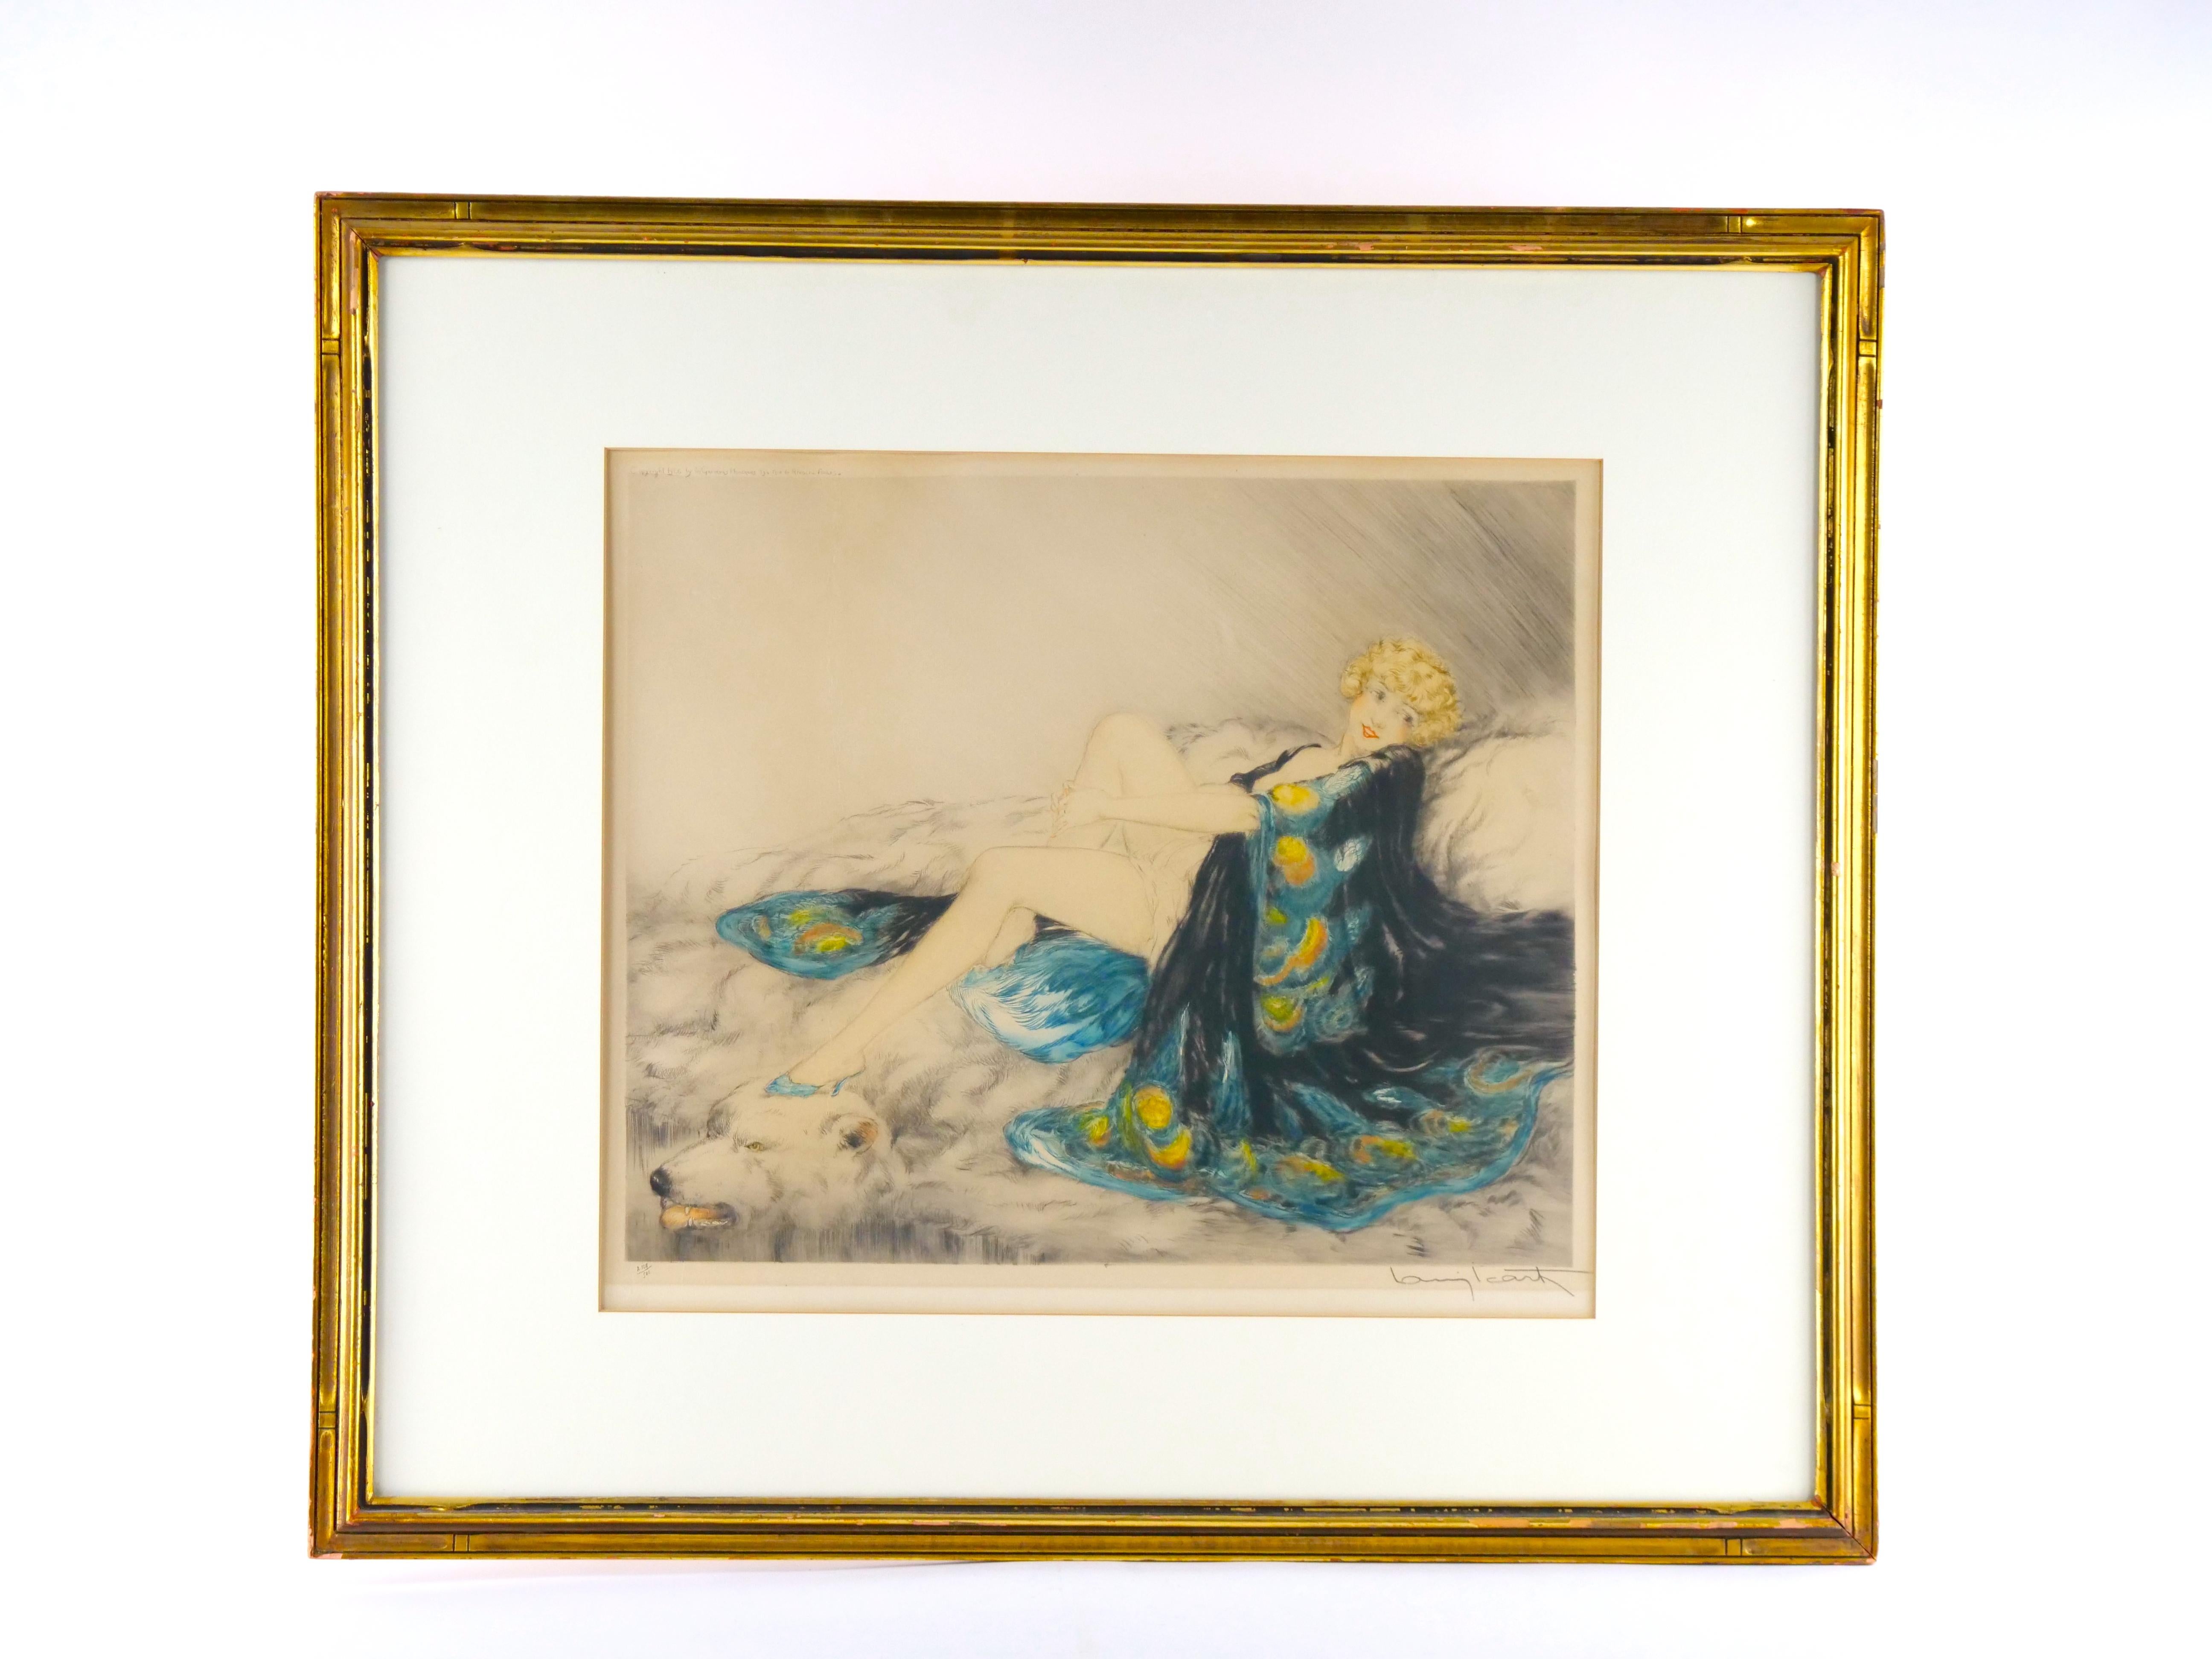 Etching by Louis Icart (1888-1950) depicting a lovely blonde female in peacock lingerie draped over a polar bearskin rug. Number 108 of 500. Hand-signed in pencil by the artist. Matted and framed in glazed giltwood frame. Plate size approximately 16